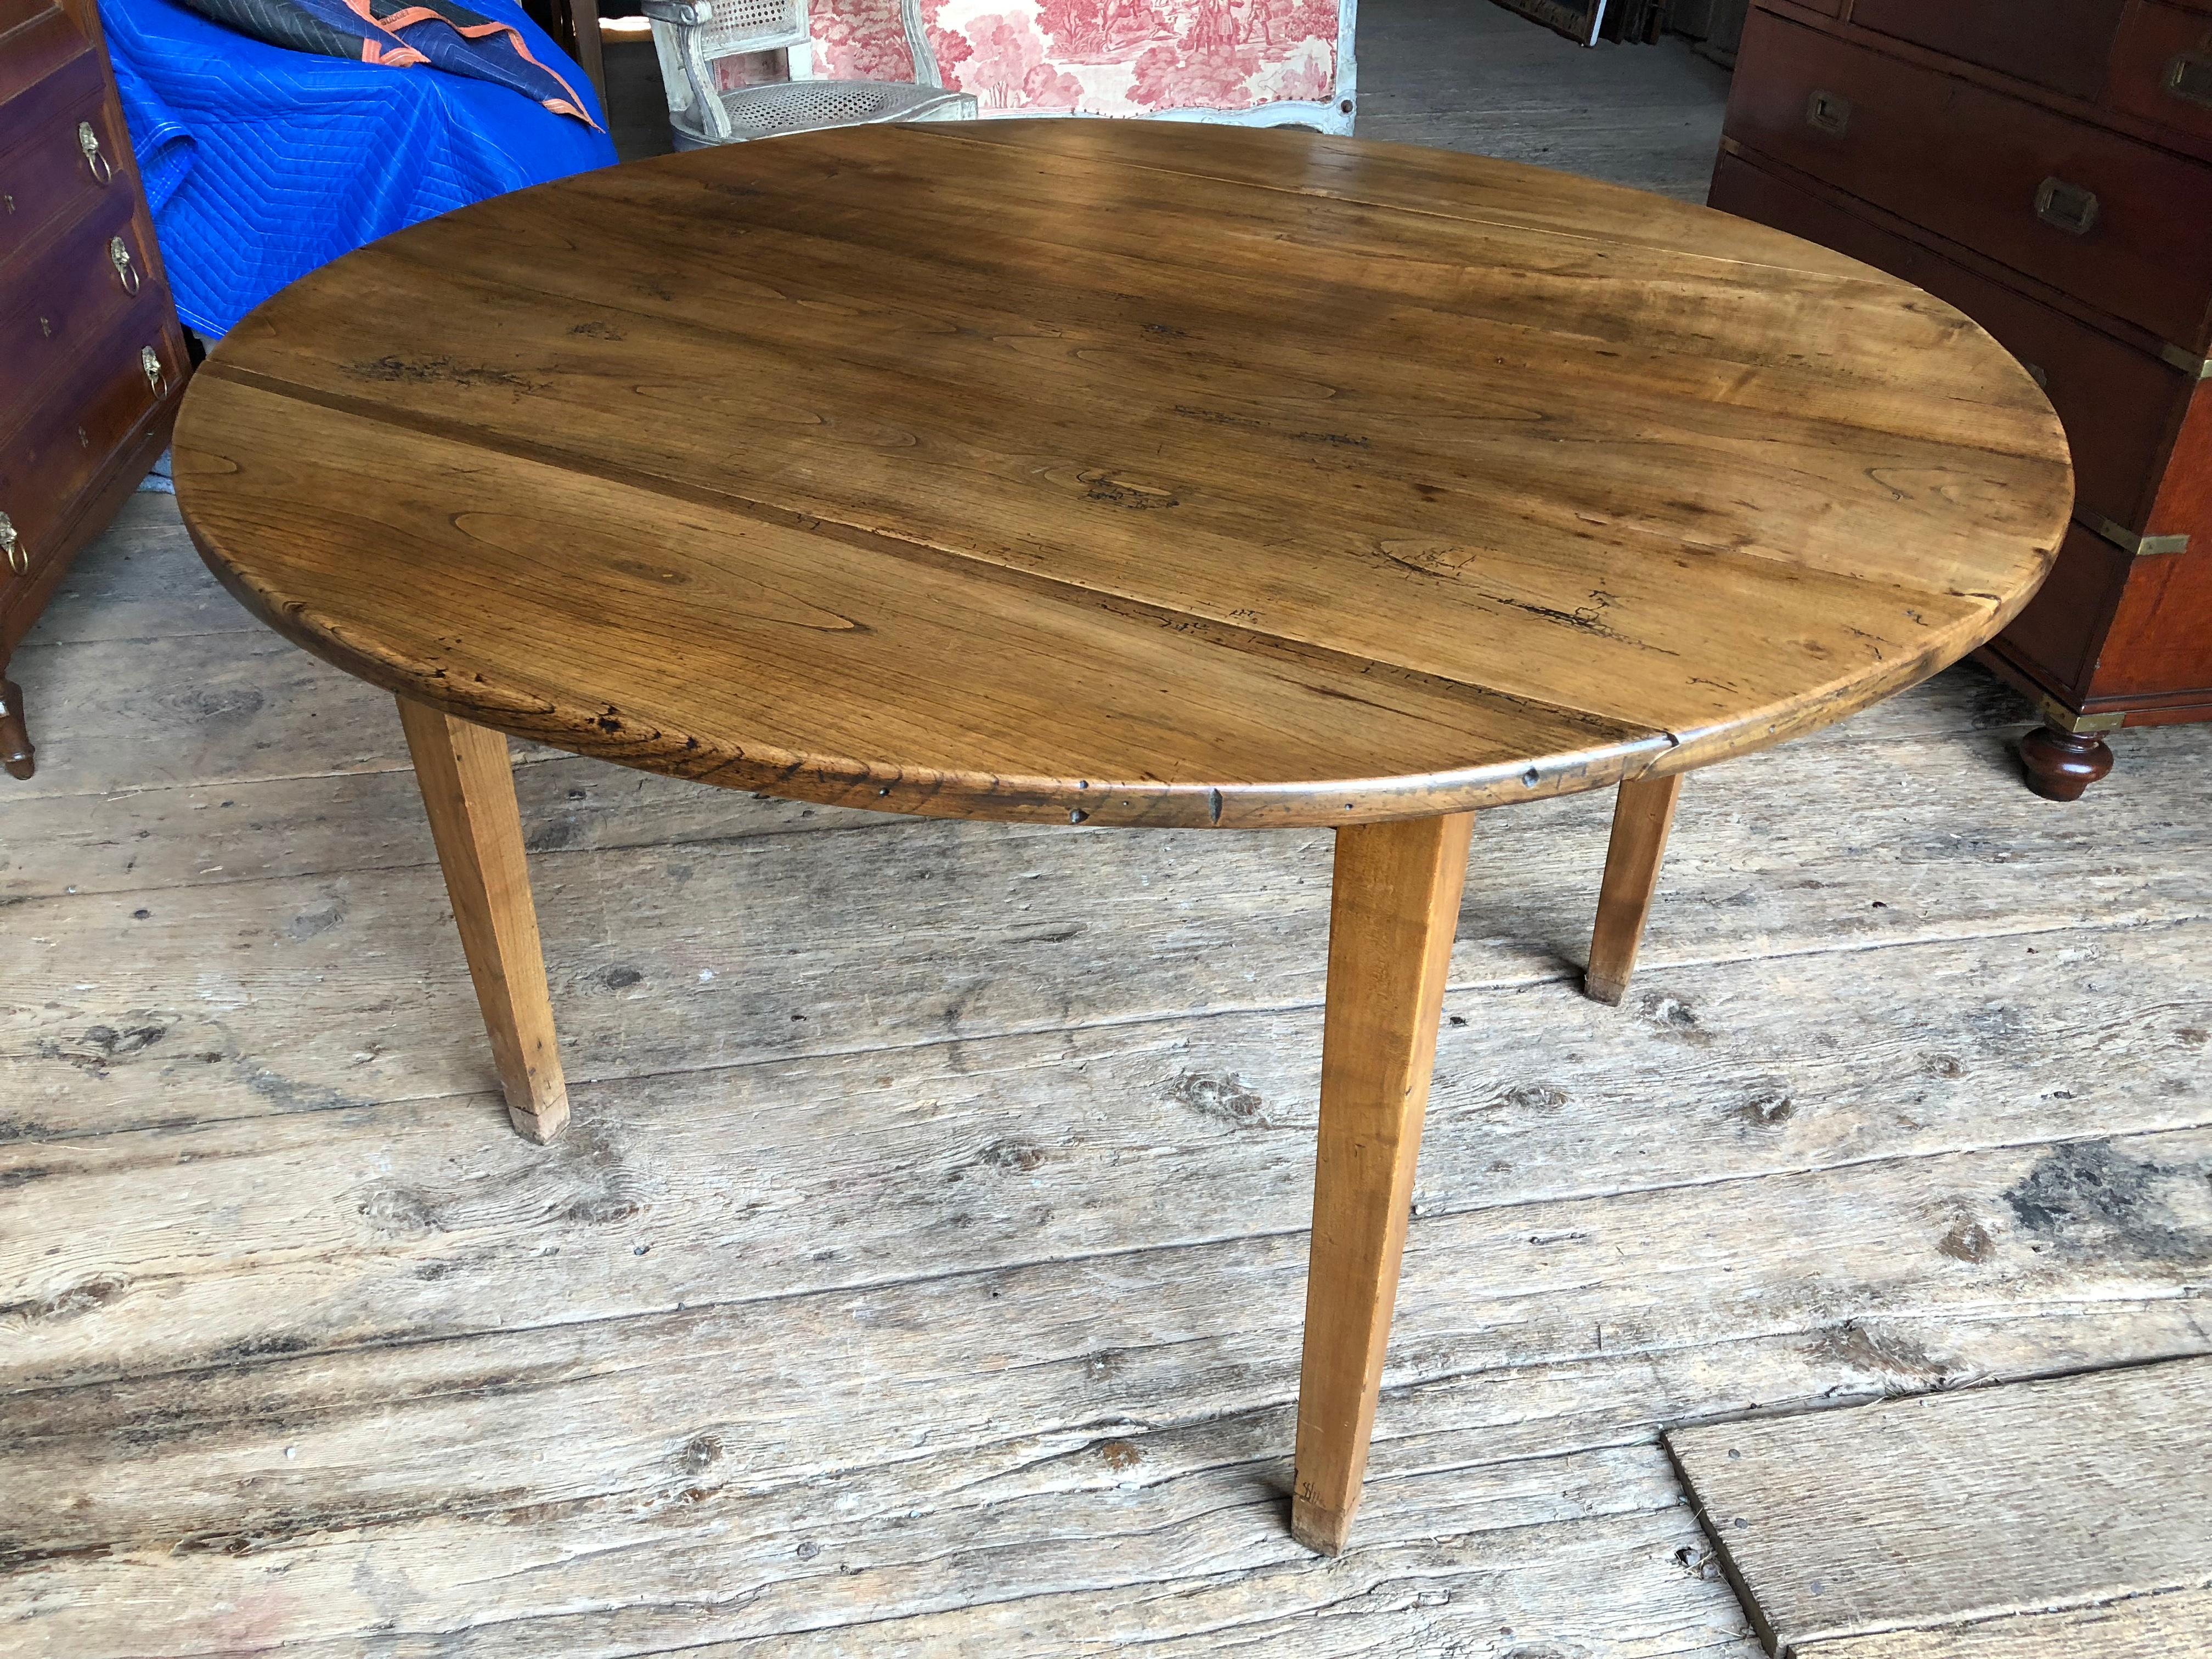 A French, mid-19th century, round drop-leaf farm table in light cherry, with simple tapered legs.